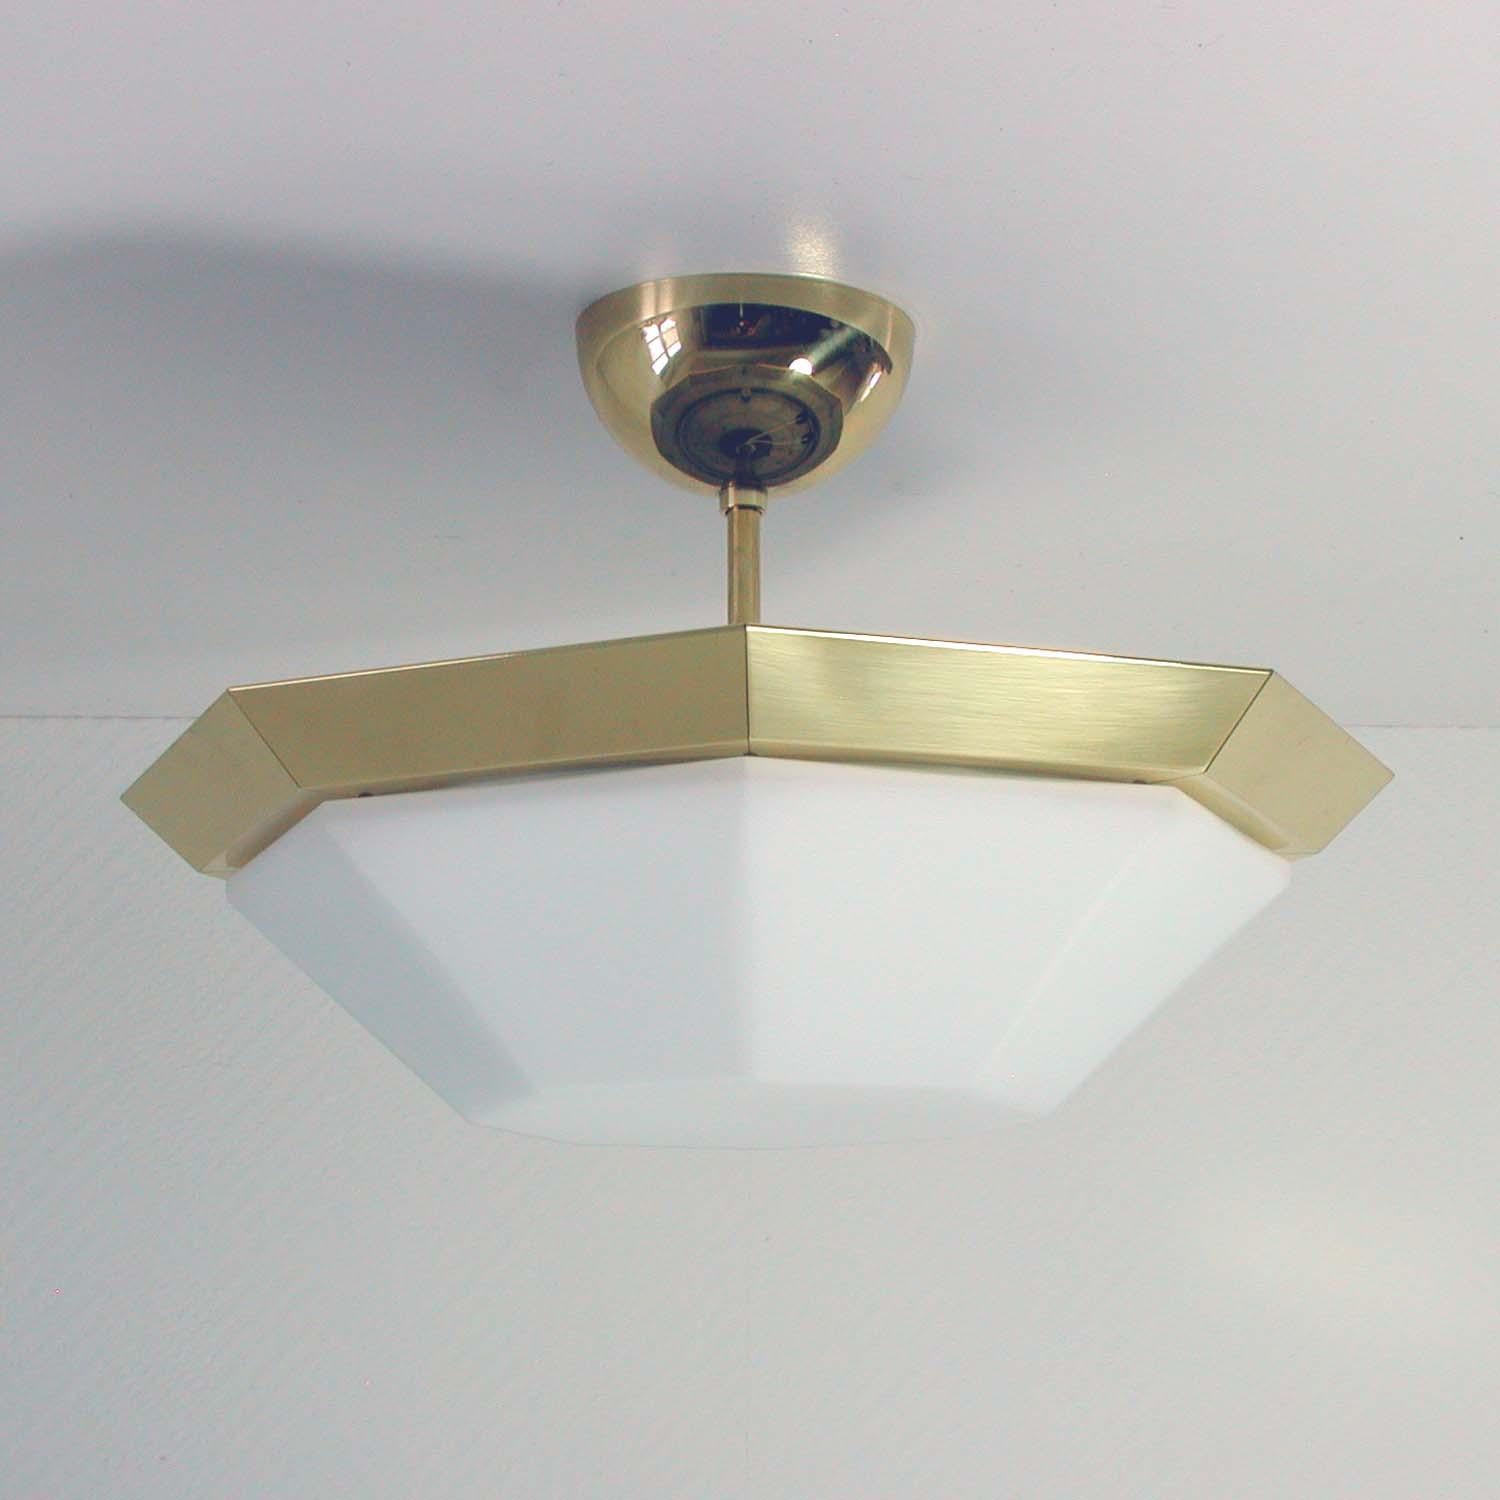 This vintage midcentury lamp was manufactured by Limburg in the 1960s. It is model number 7028. It has got an octagonal brass frame and a milk glass lamp shade.

The lamp can be used as a wall light / sconce or a flush mount (either with lamp rod